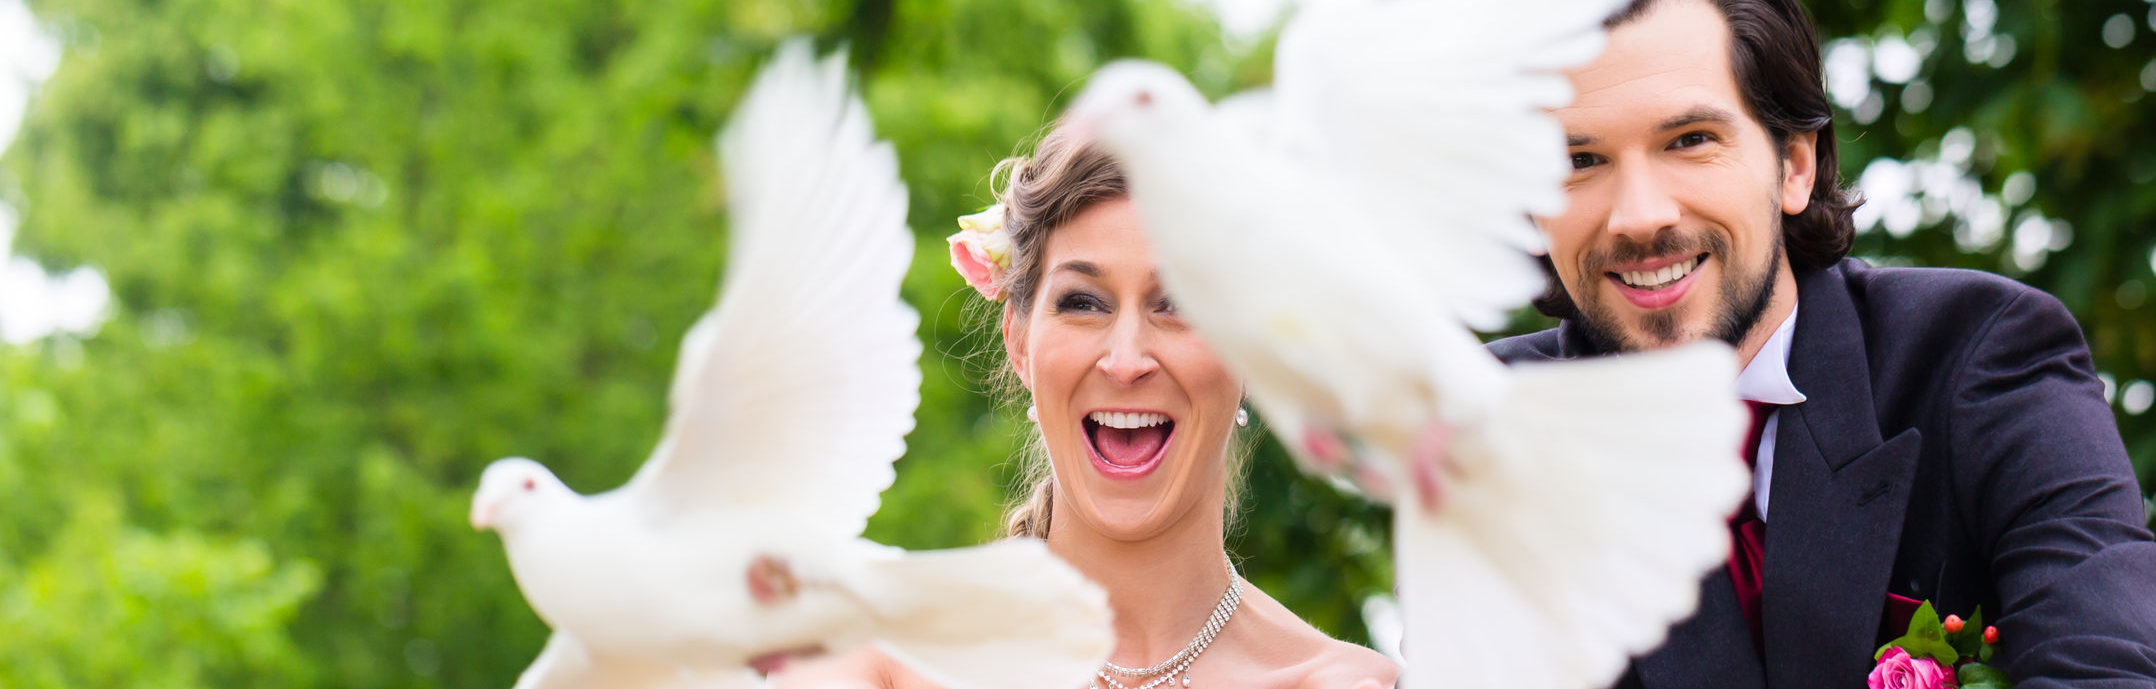 33790663 - bridal pair with flying white doves at wedding